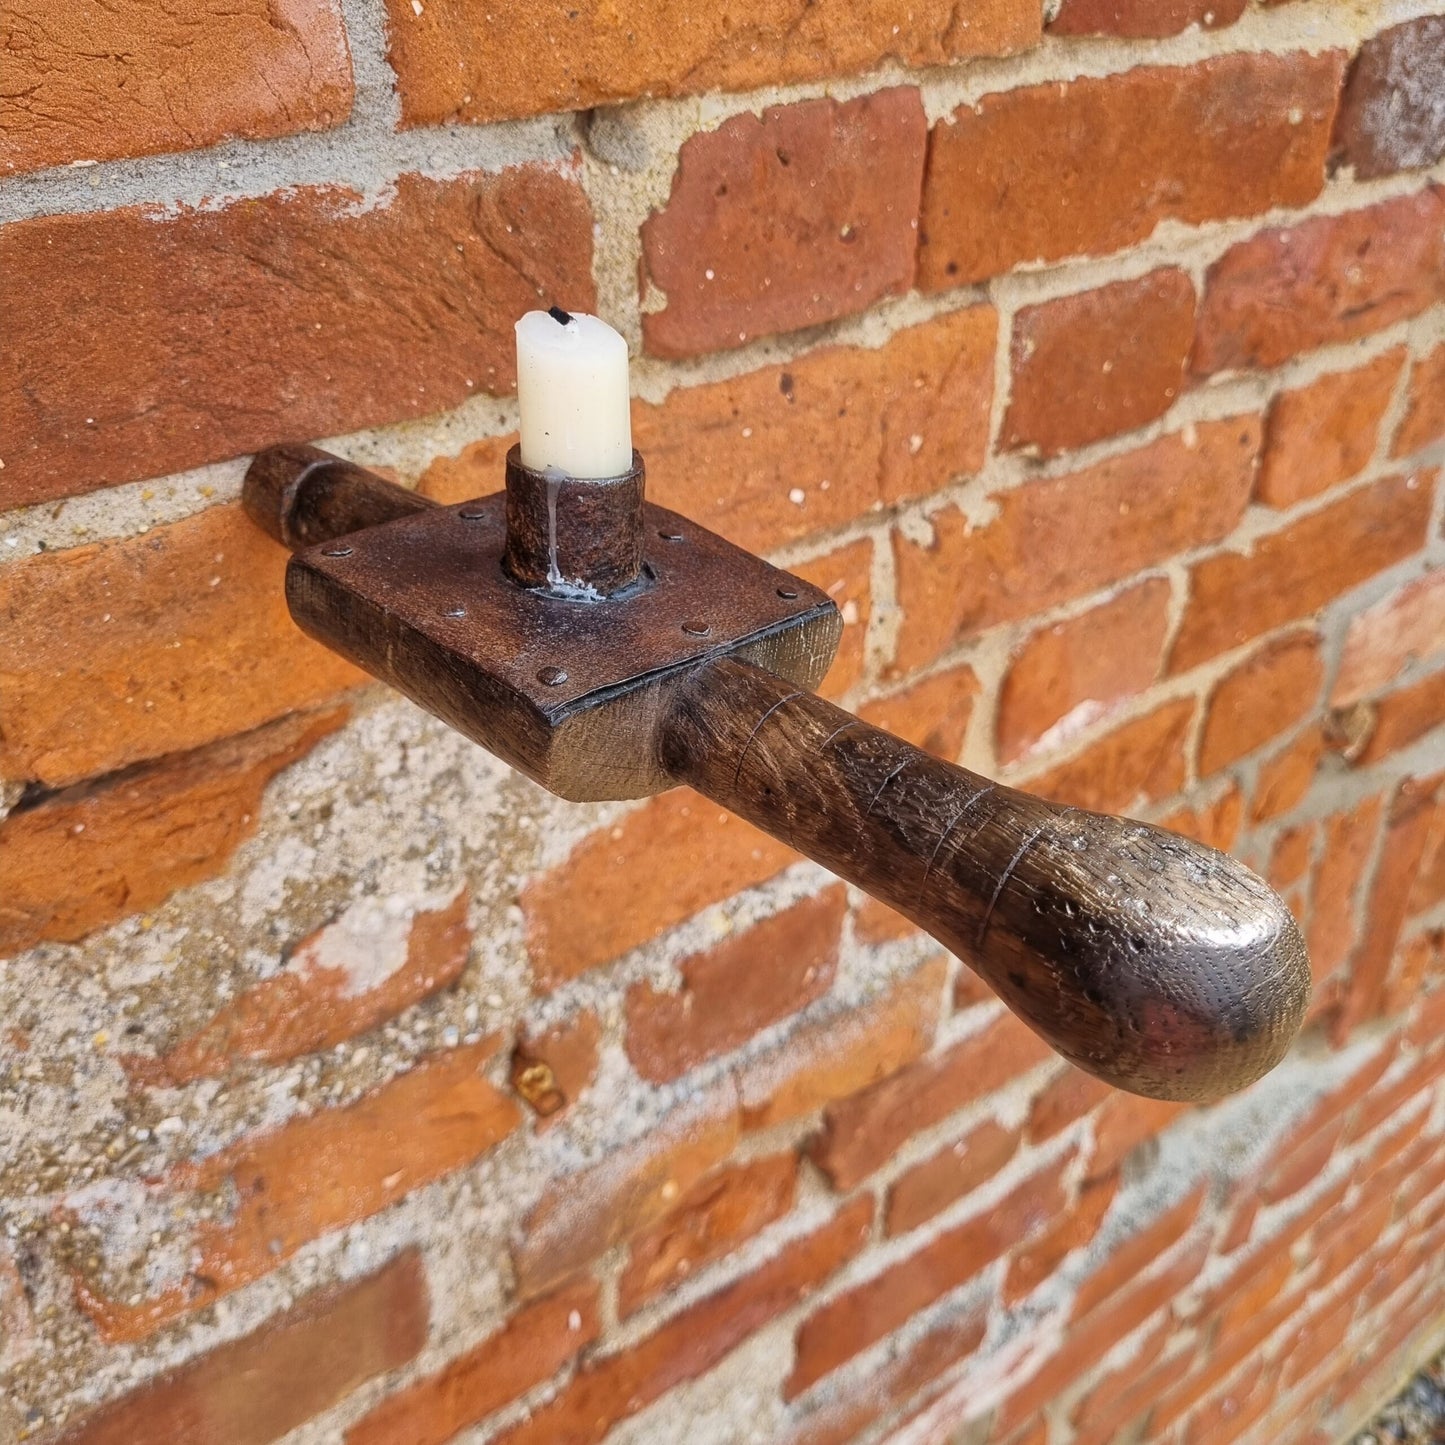 Rare Late 18th Century English Antique Treen and Iron "Sticking Tommy" or "Go-to-bed" Candlestick With Iron Wall Spike